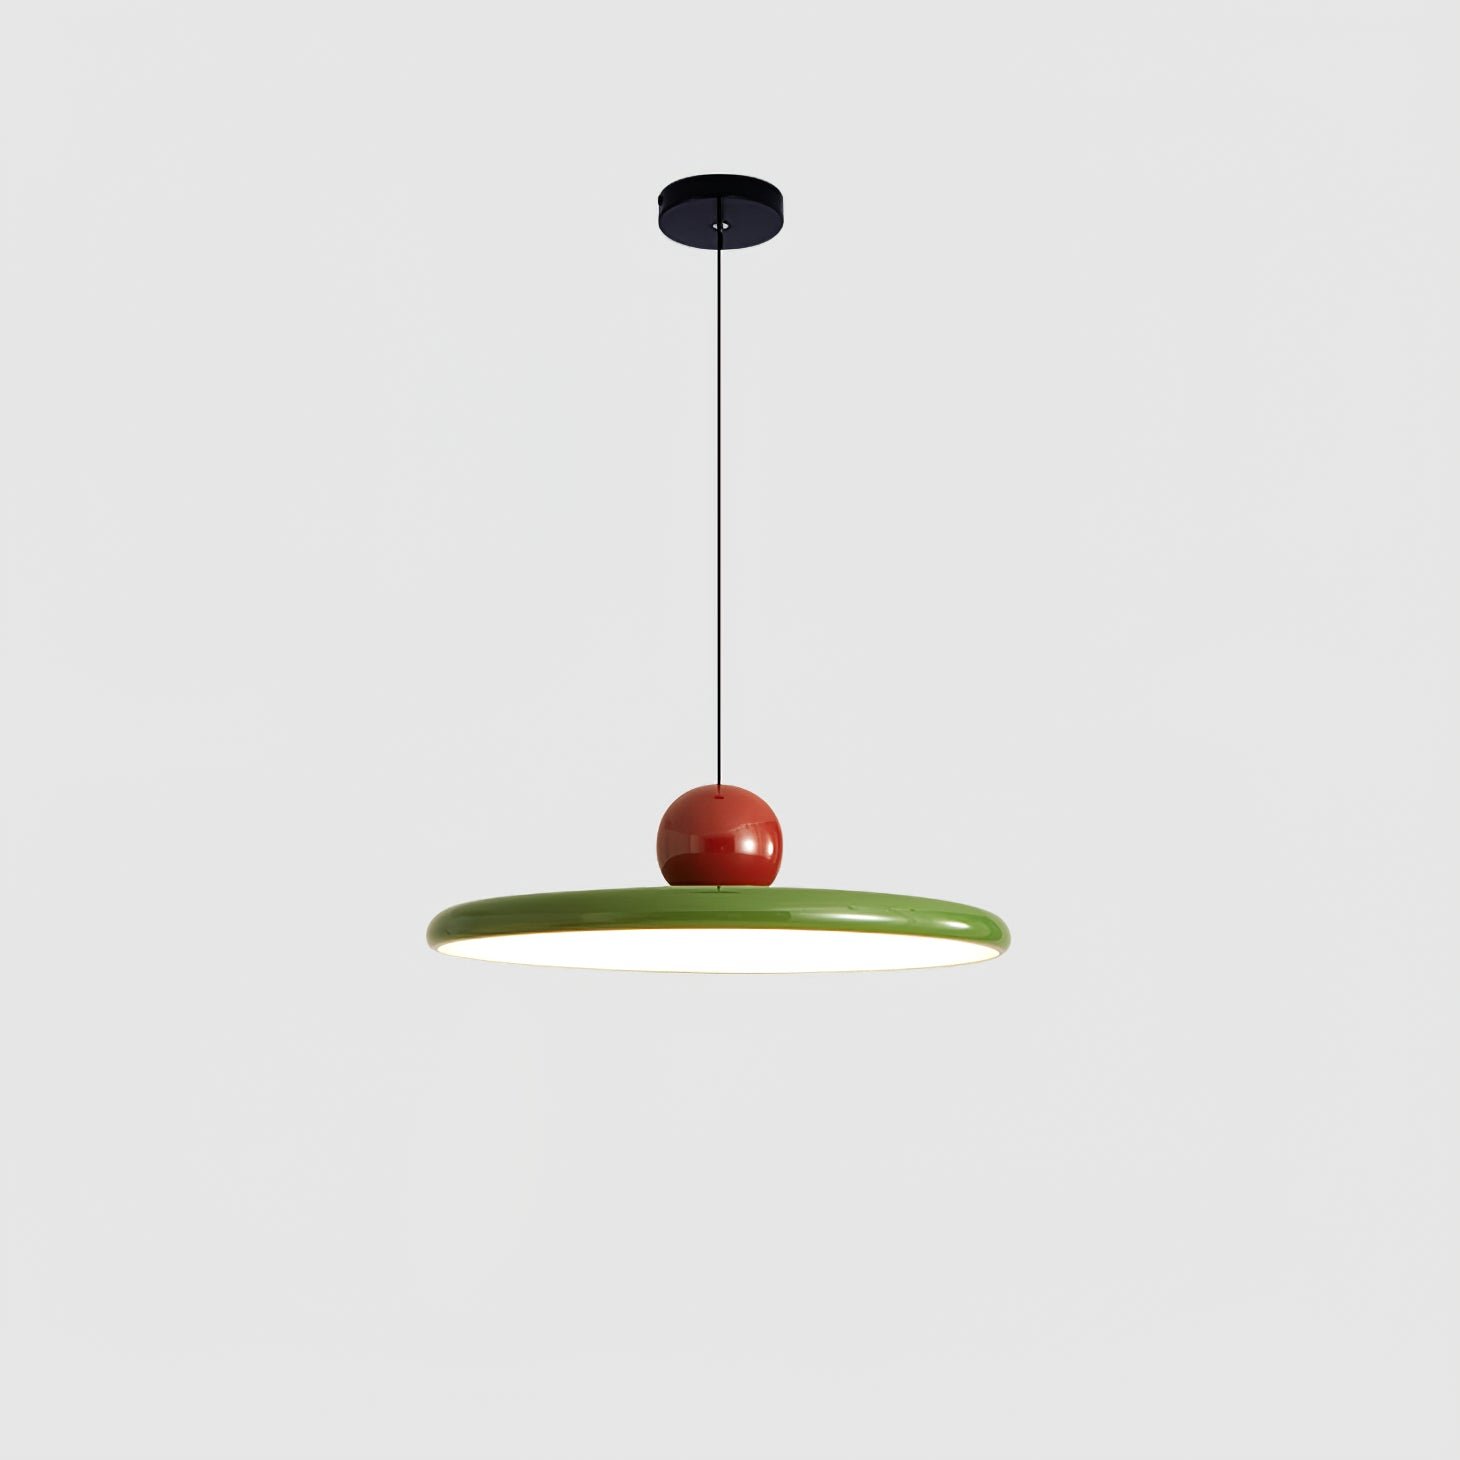 Lola Pendant Lamp in Red or Green, Cool White, Diameter 19.6" x Height 4.7" (50cm x 12cm)